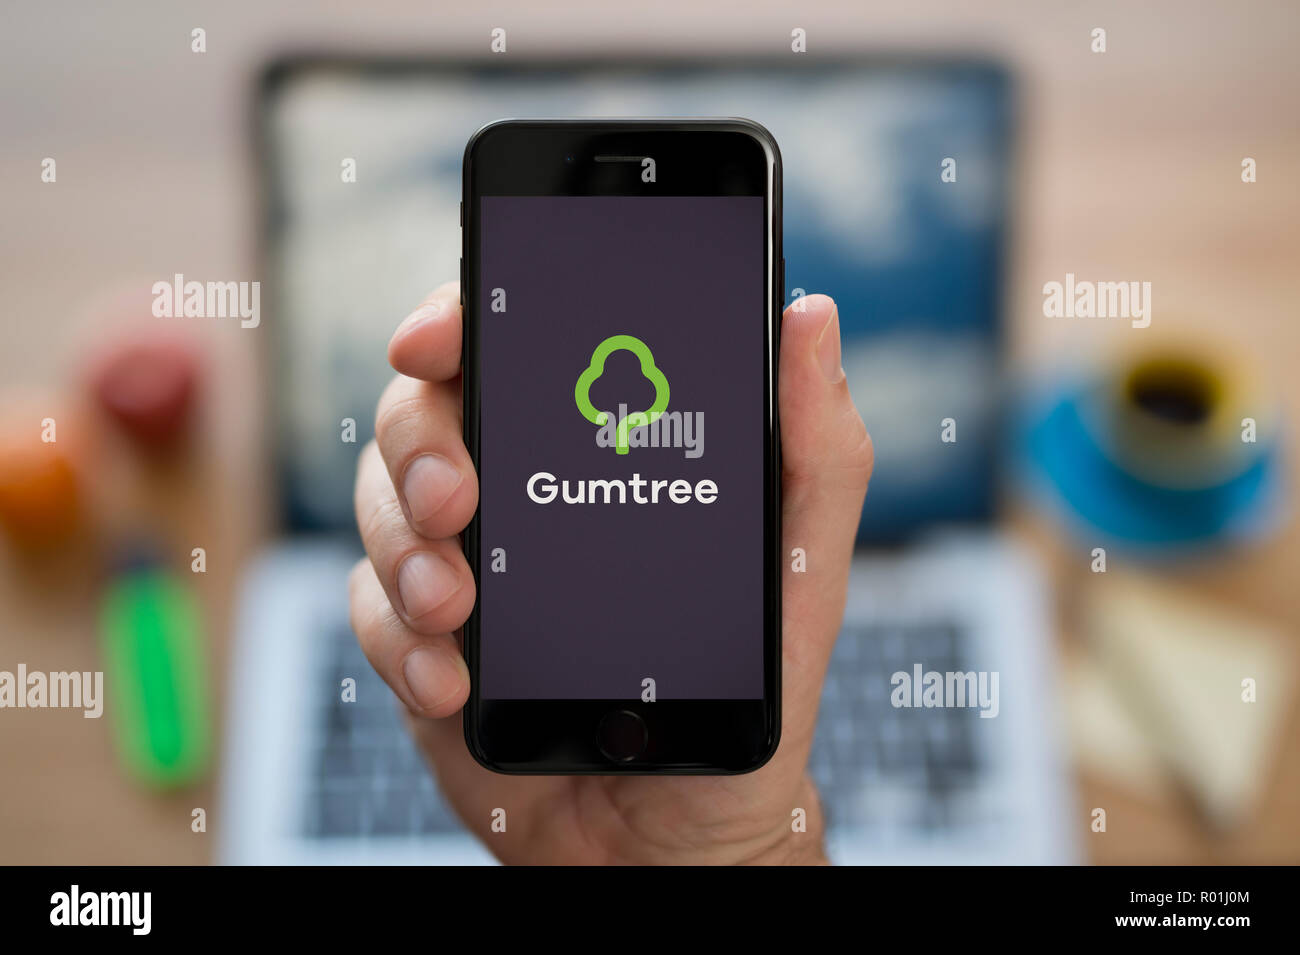 A man looks at his iPhone which displays the Gumtree logo, while sat at his computer desk (Editorial use only). Stock Photo